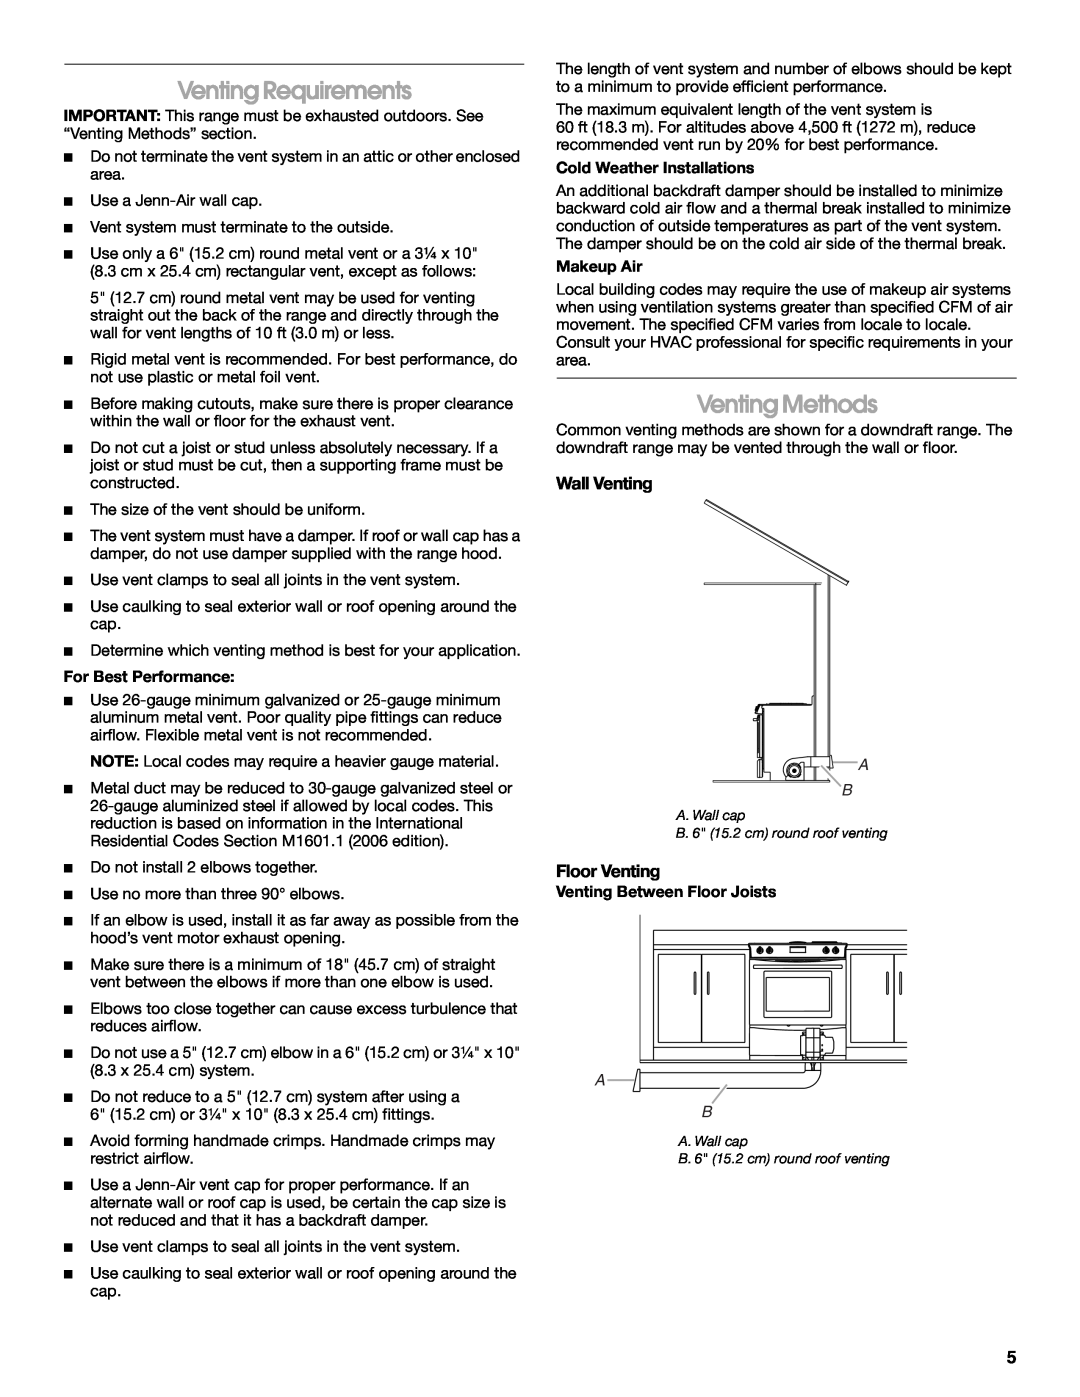 Jenn-Air W10253462A installation instructions Venting Requirements, Venting Methods, Wall Venting, Floor Venting 